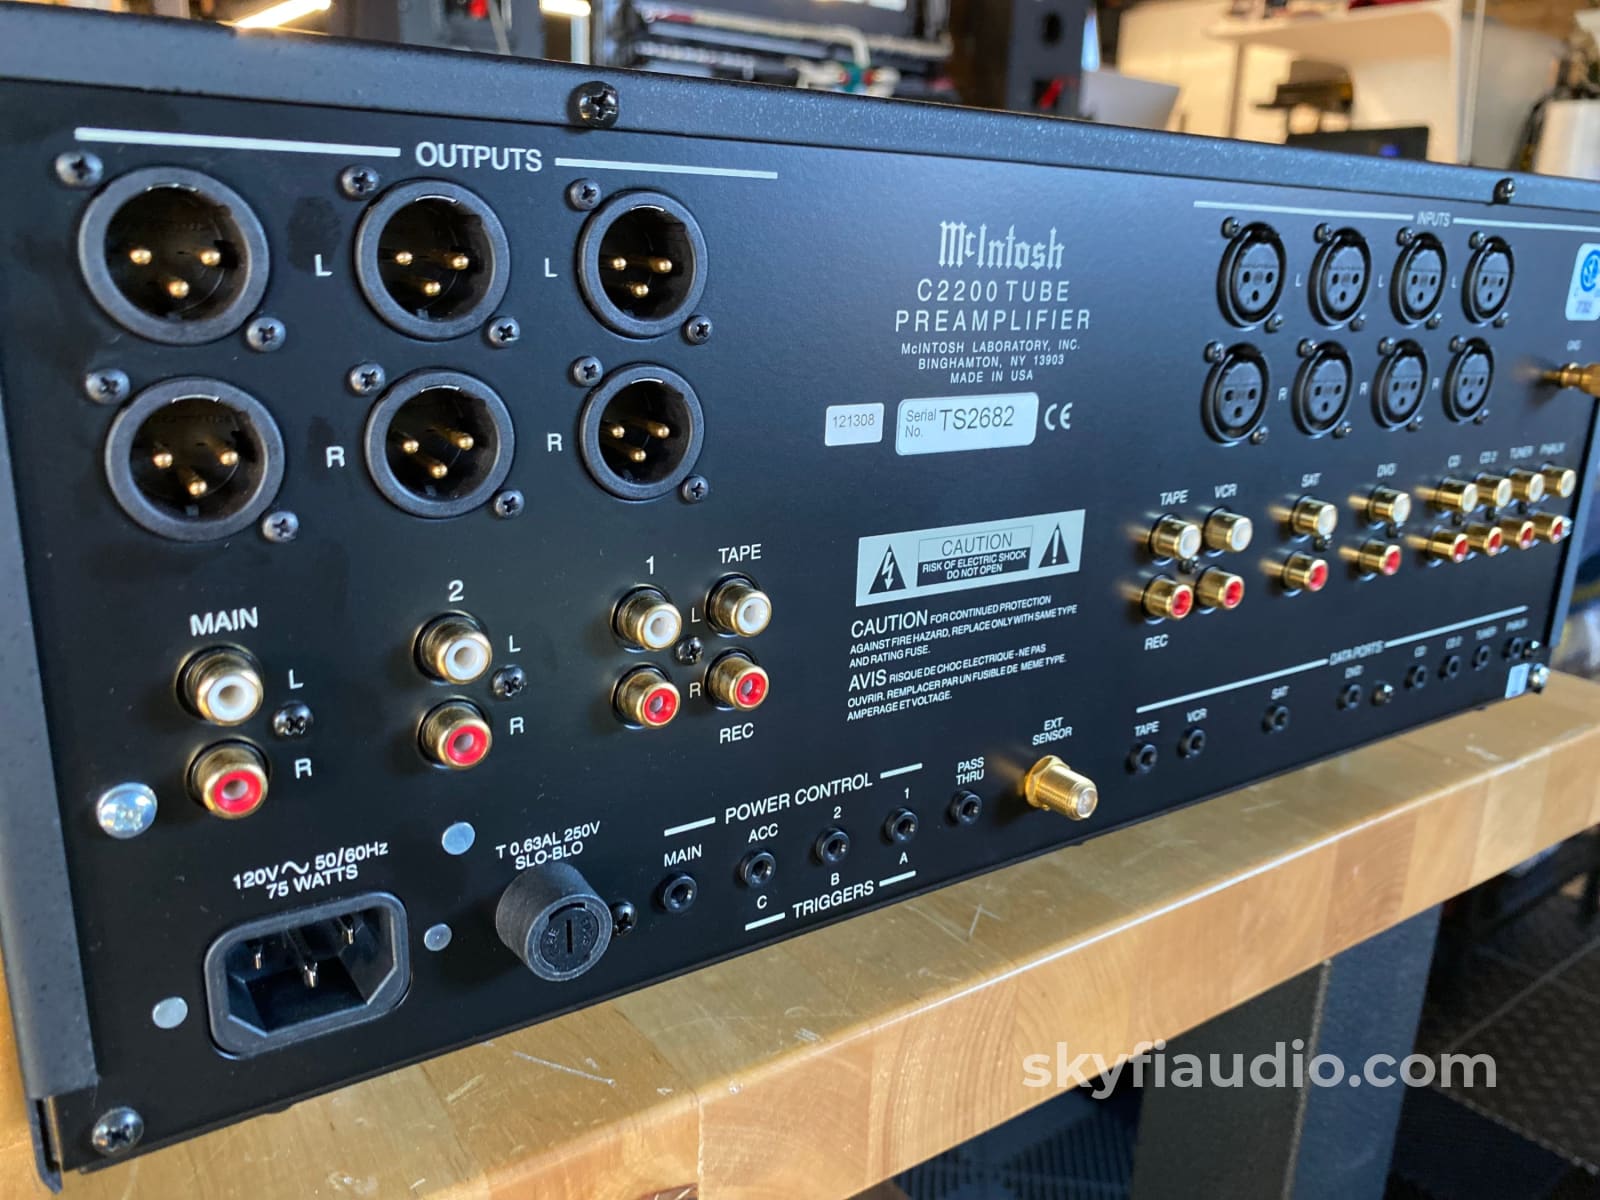 Mcintosh C2200 Tube Preamplifier - All Analog For Purists